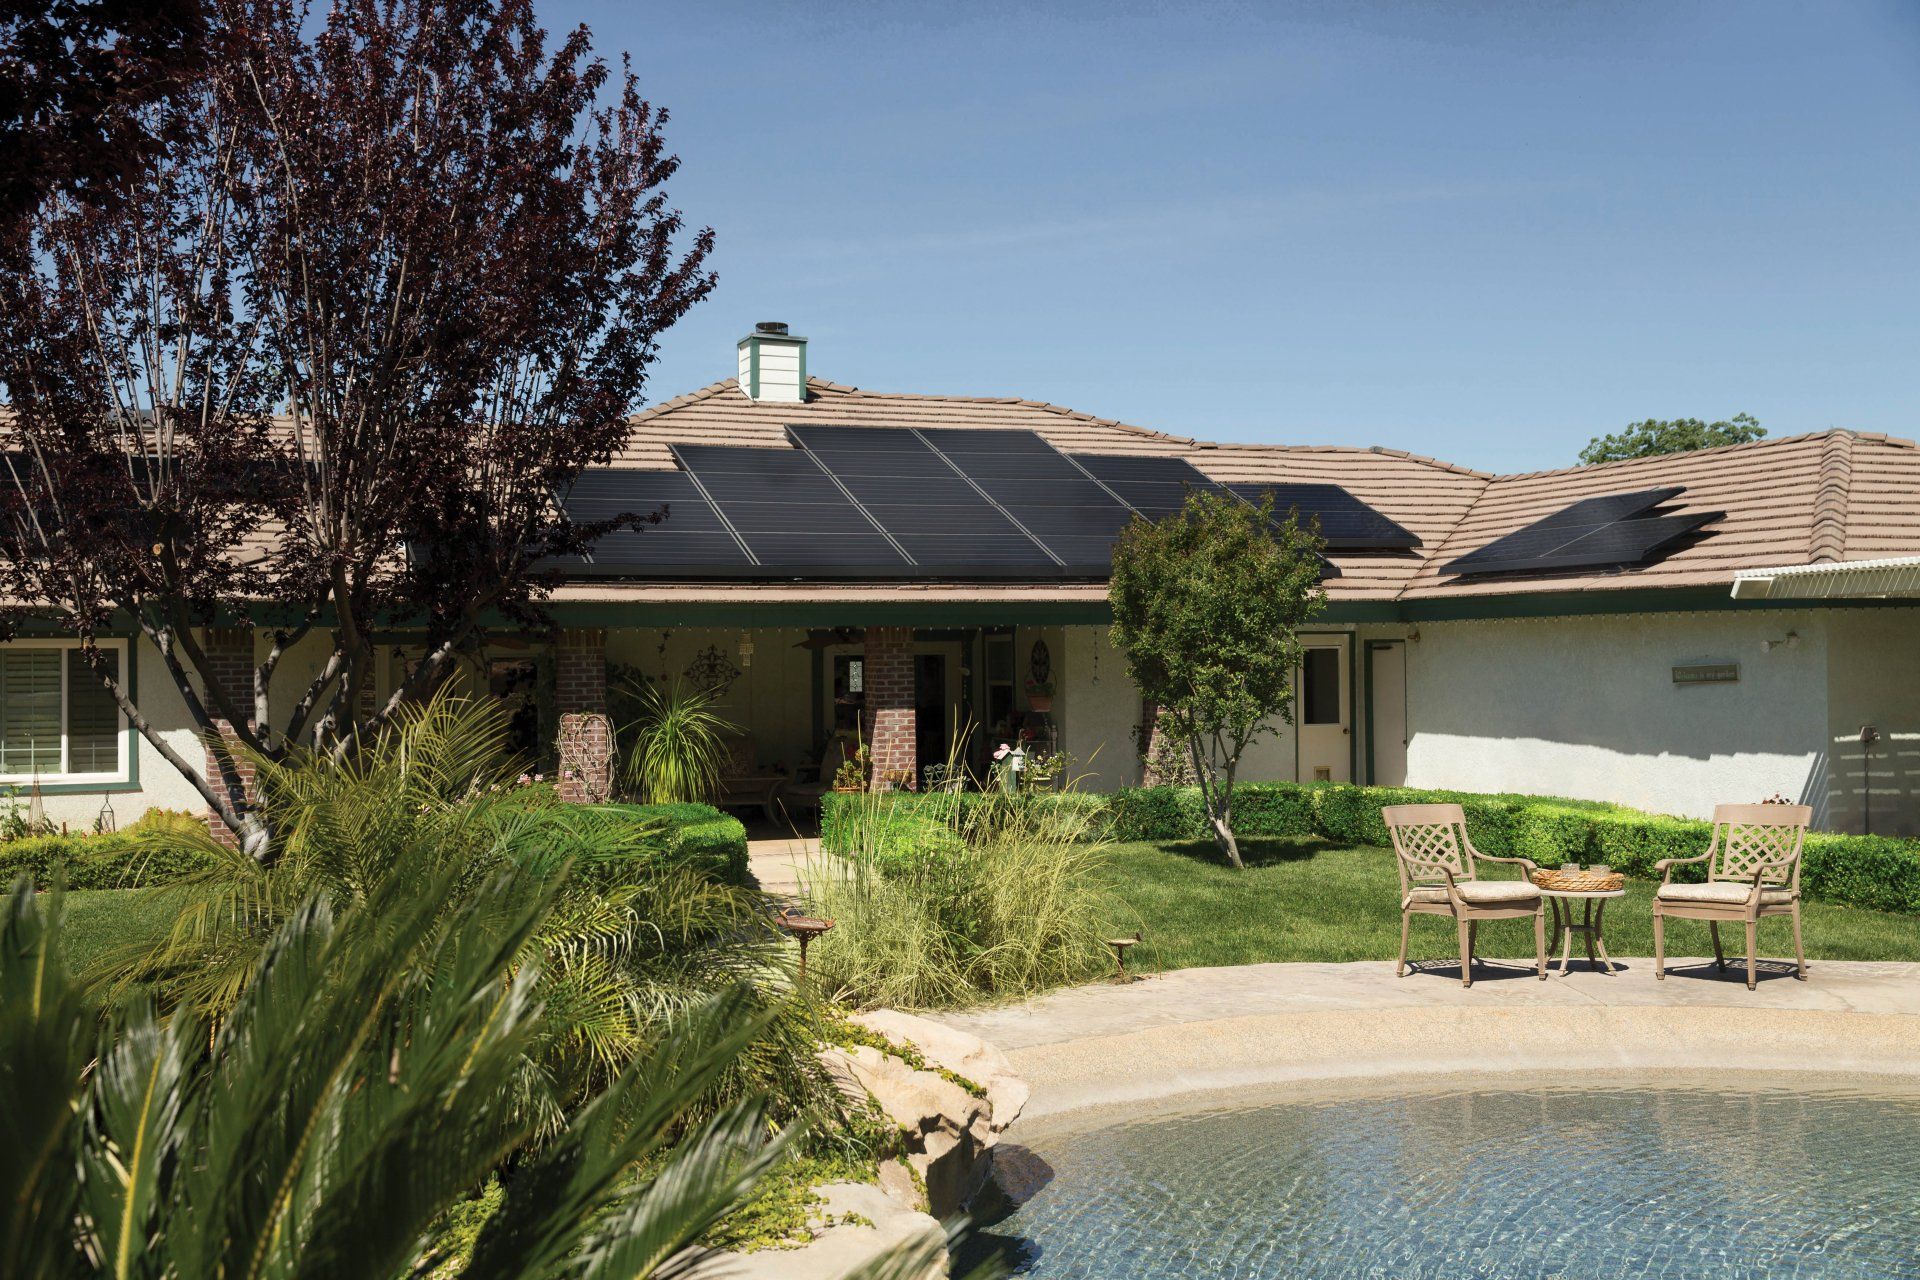 Solar panels on a roof contribute to sustainability when building a custom home.